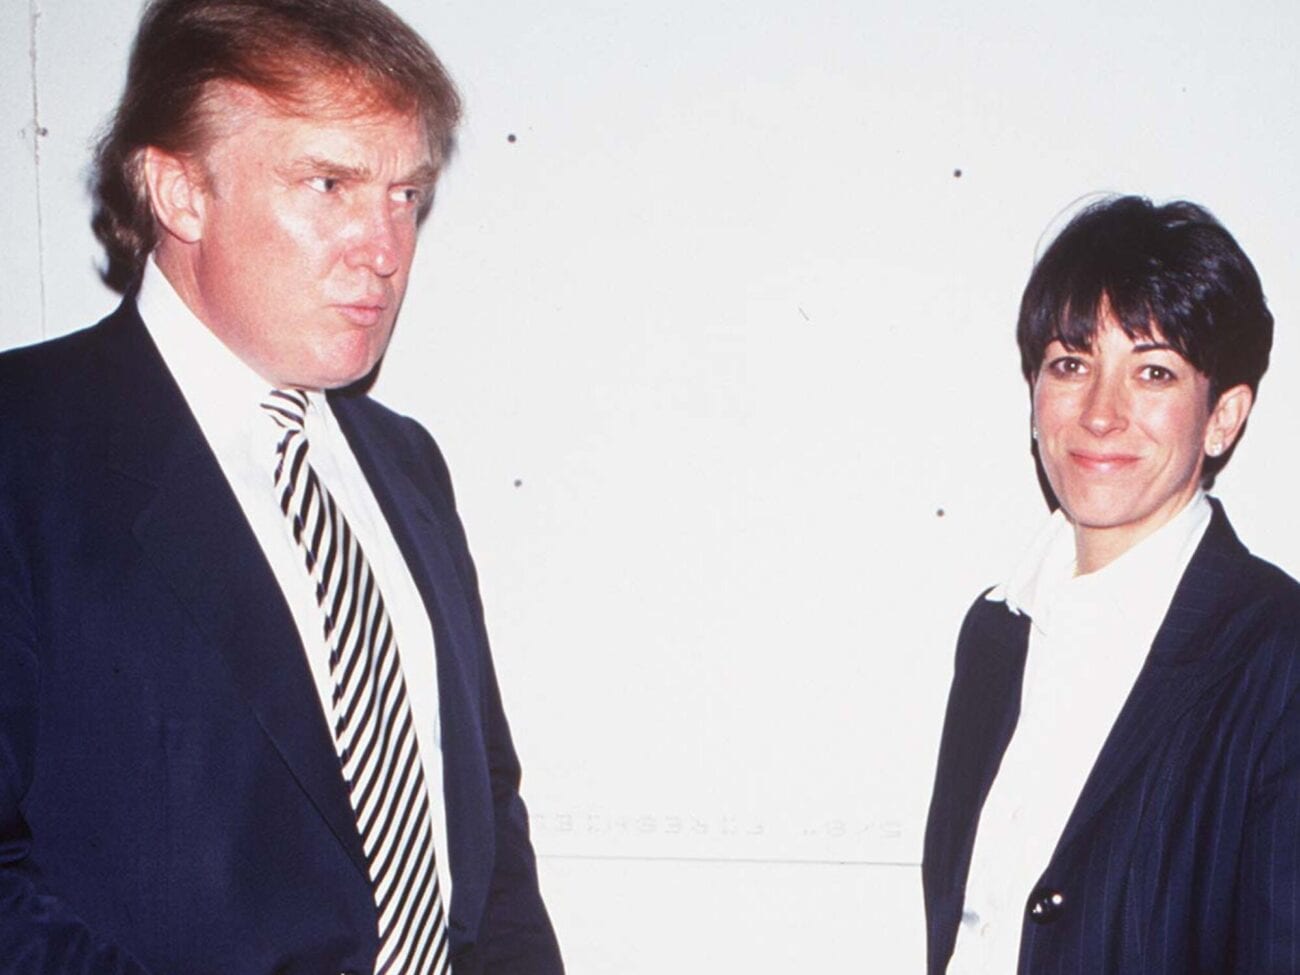 Just how close were Jeffrey Epstein's ex-lover and the former US President? See the photos of Ghislaine Maxwell and Donald Trump here.